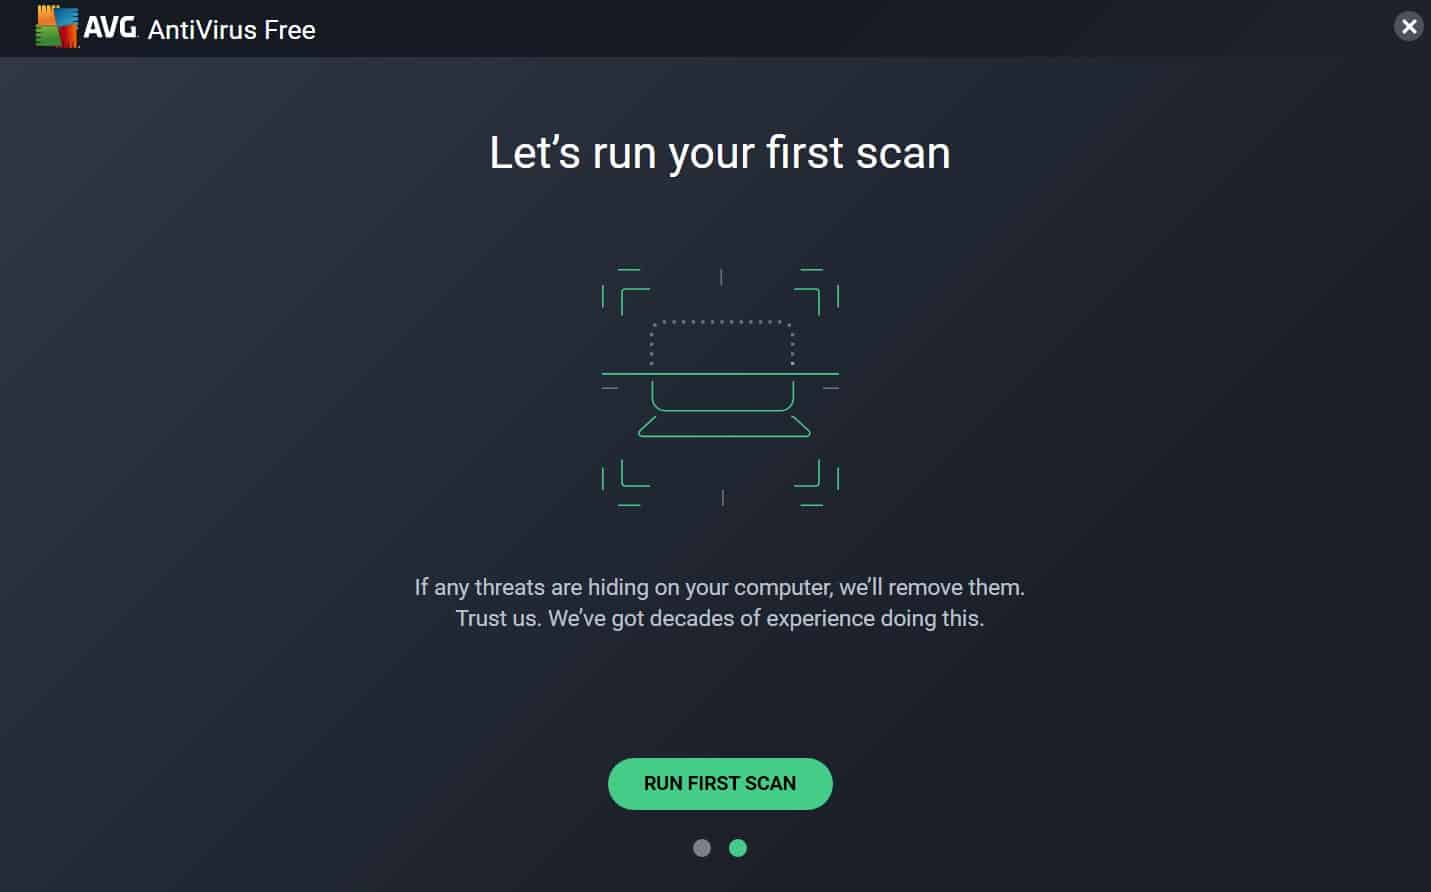 Run a full system scan using your preferred antivirus software.
If any malware or viruses are detected, follow the recommended actions to remove them.